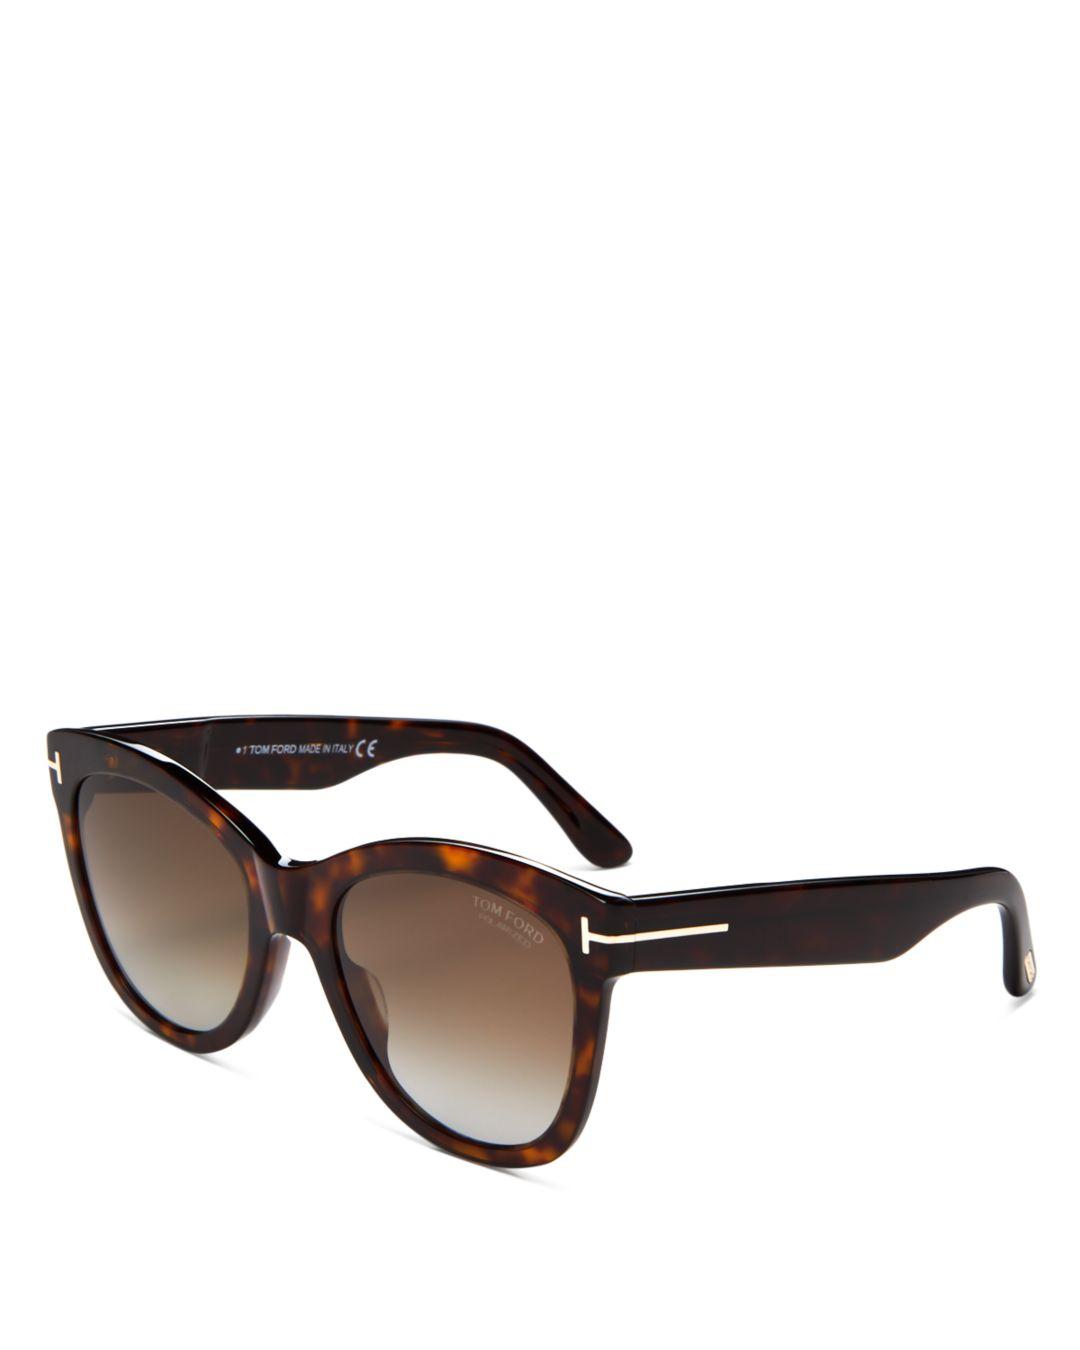 Tom Ford Wallace Polarized Cat Eye Sunglasses in Brown | Lyst